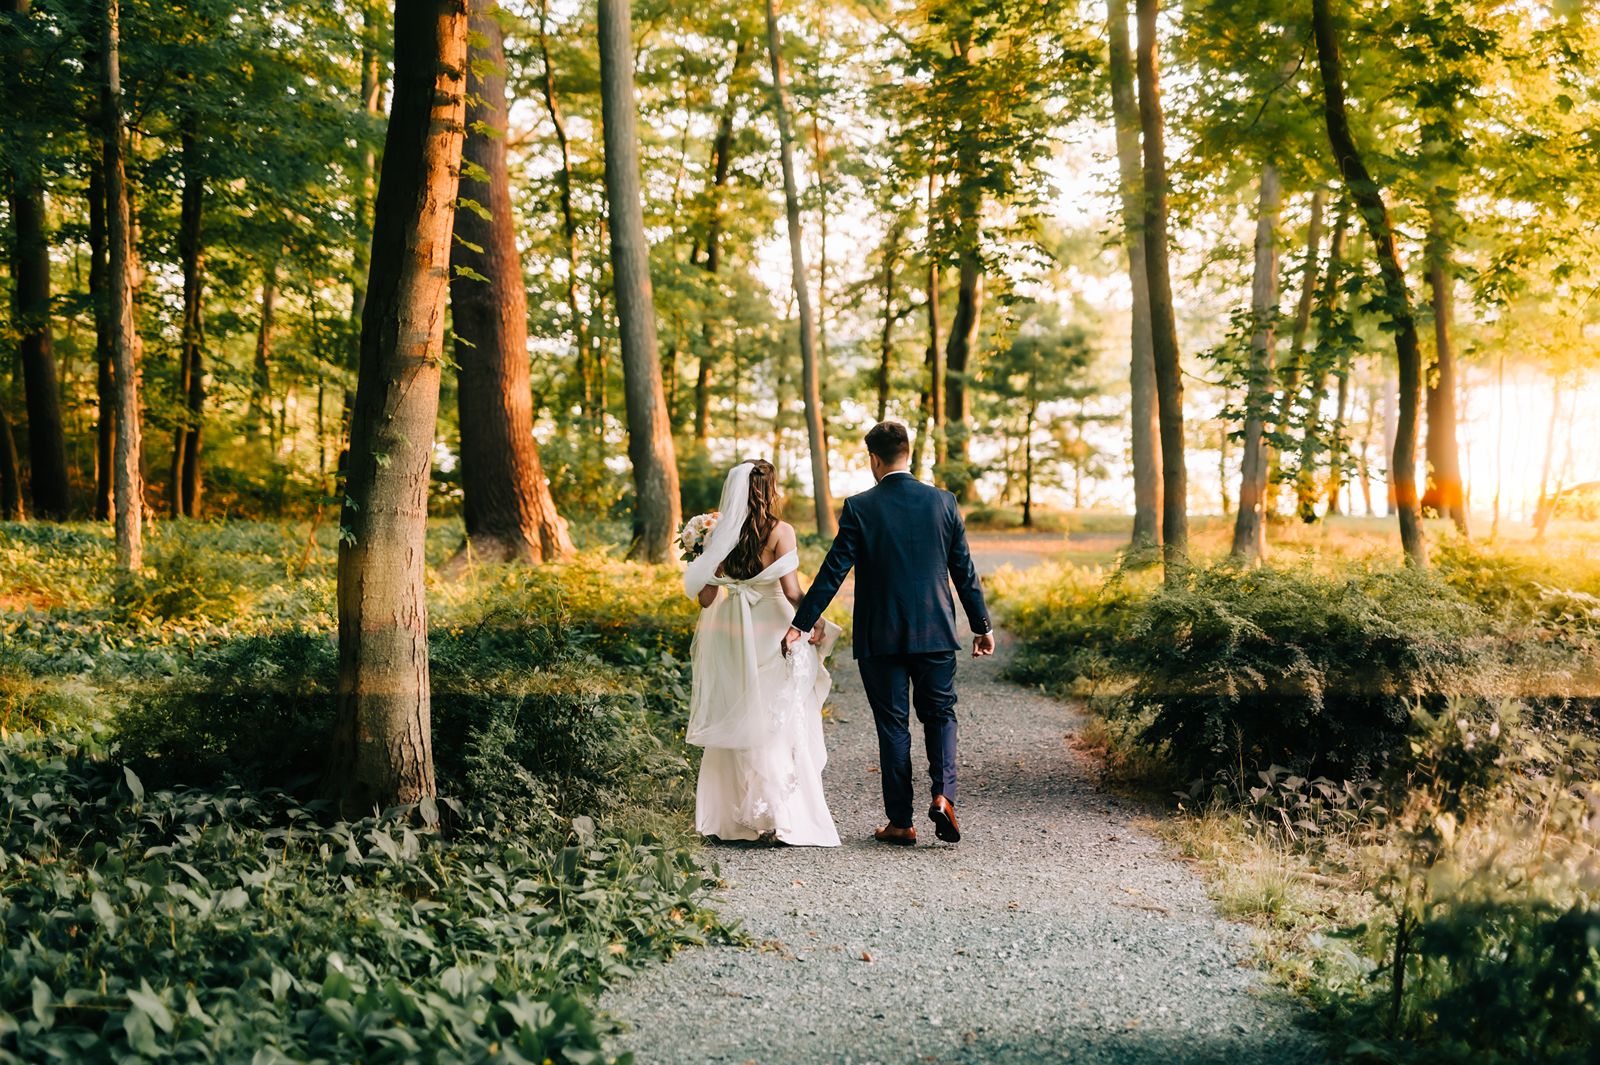 Bride and Groom Holding Hands Walking in Woods At Sunset 